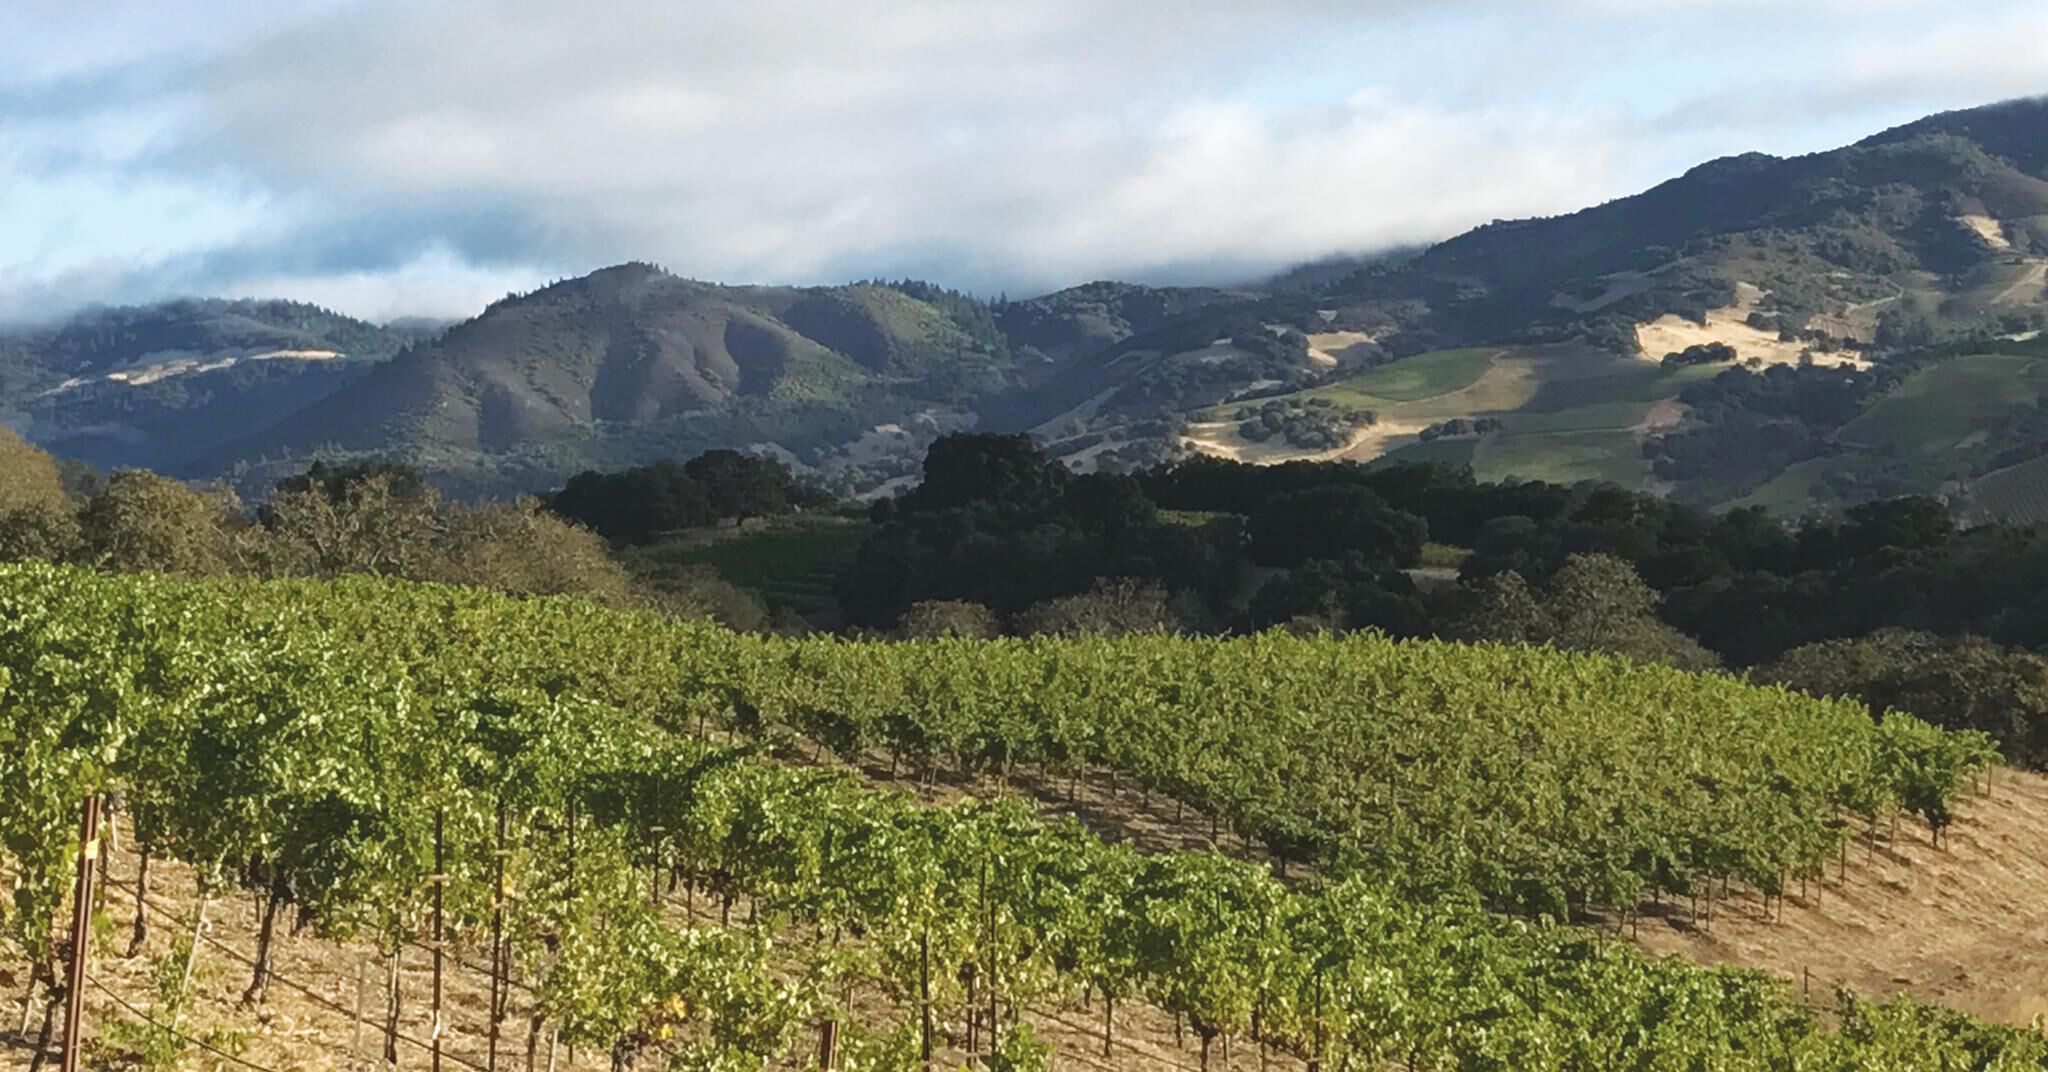 10 INTERESTING FACTS ABOUT SMOTHERS-REMICK RIDGE VINEYARD